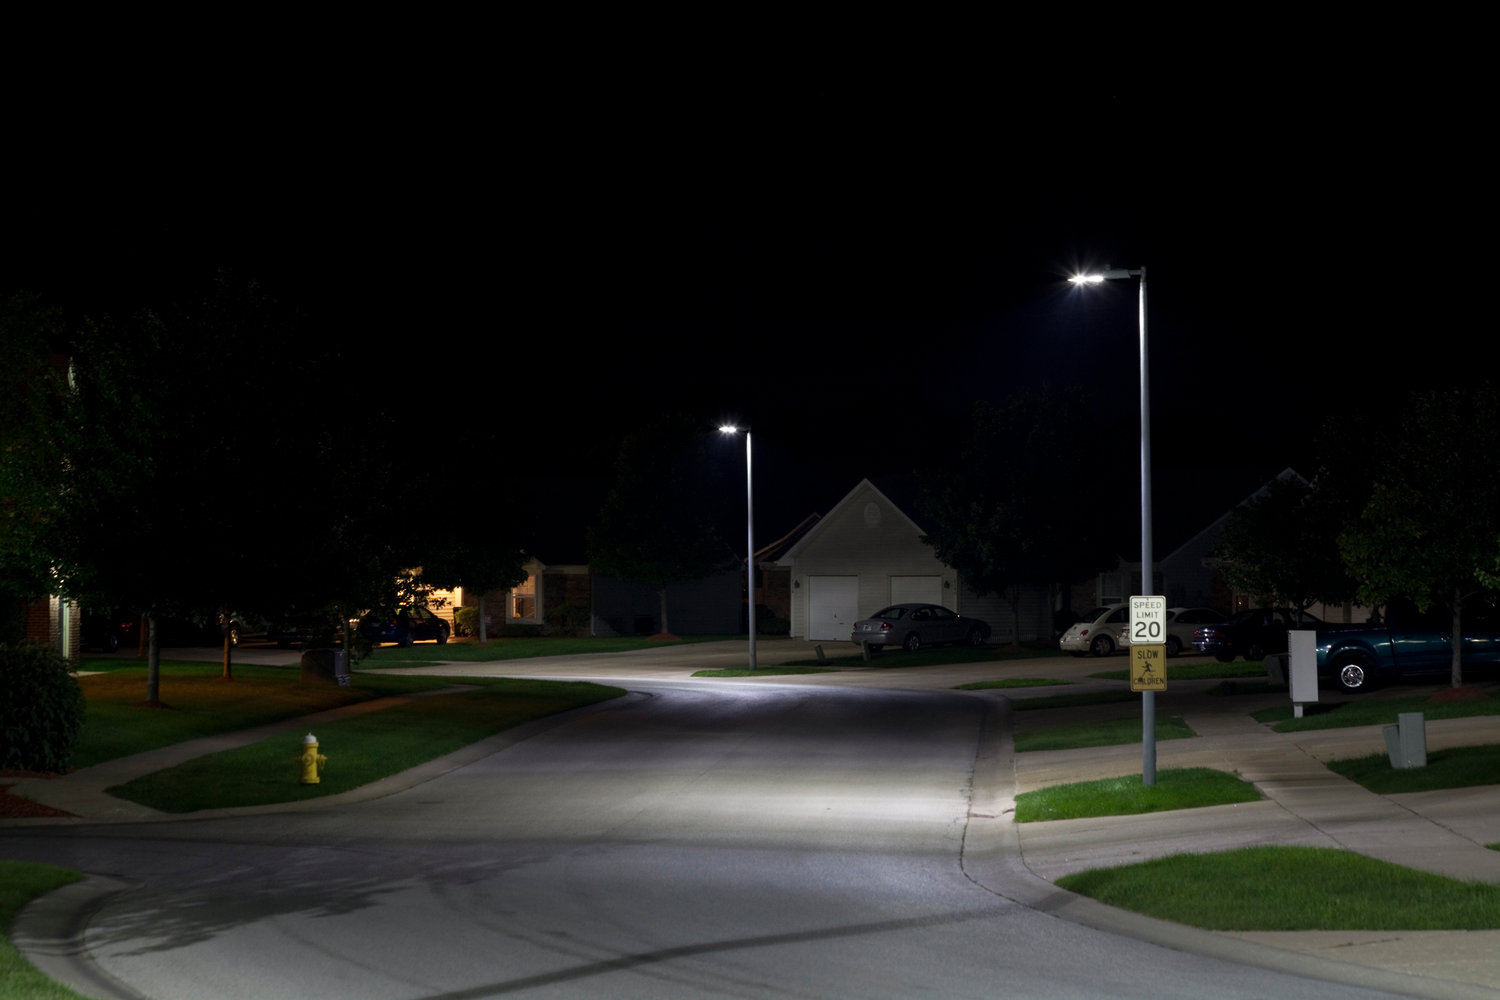 A typical residential neighborhood with LED streetlights as depicted by the U.S. Department of Energy.